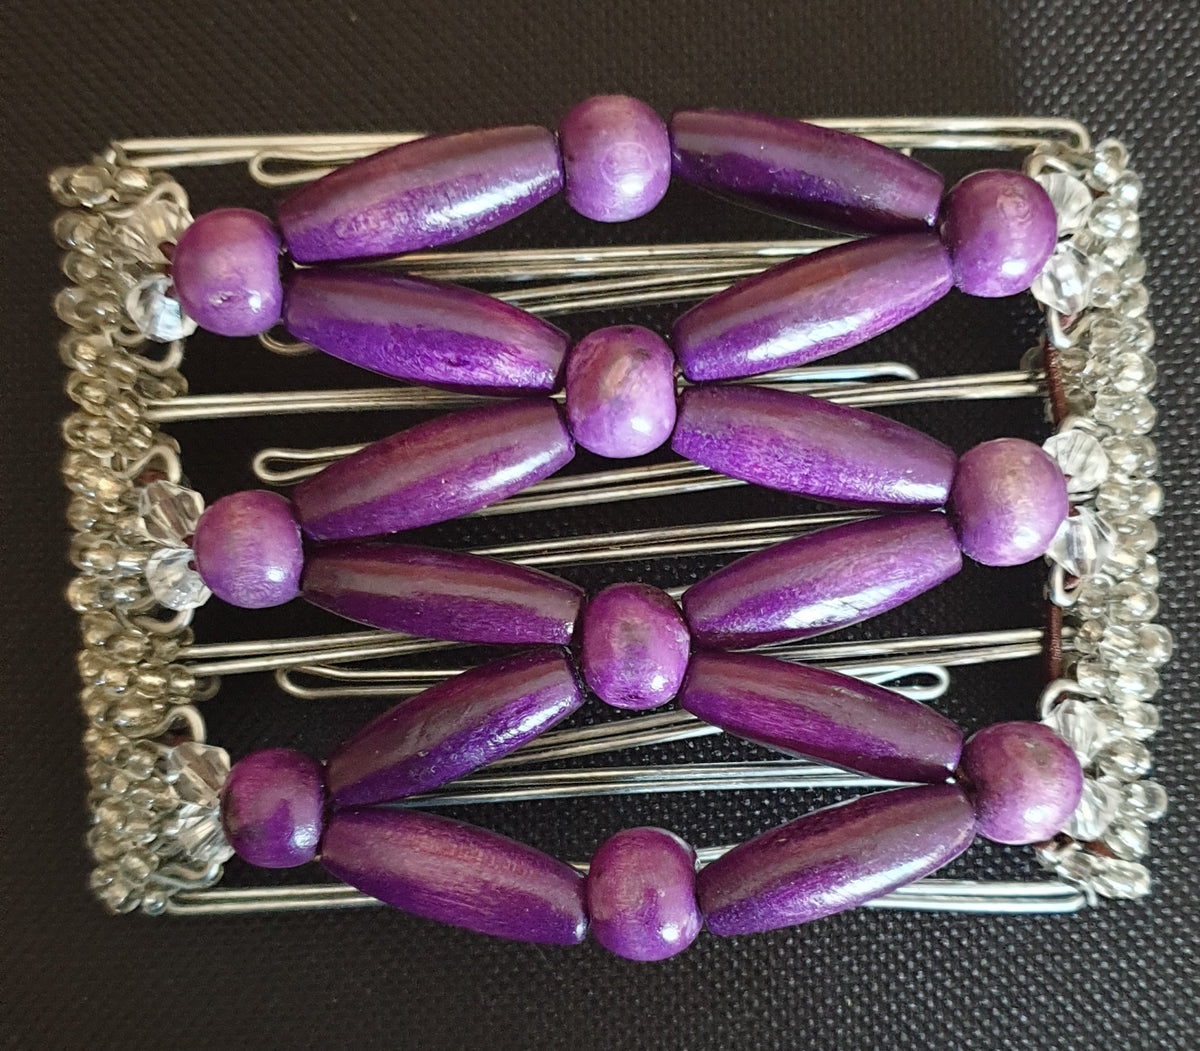 7 TOOTH HAIR COMBS